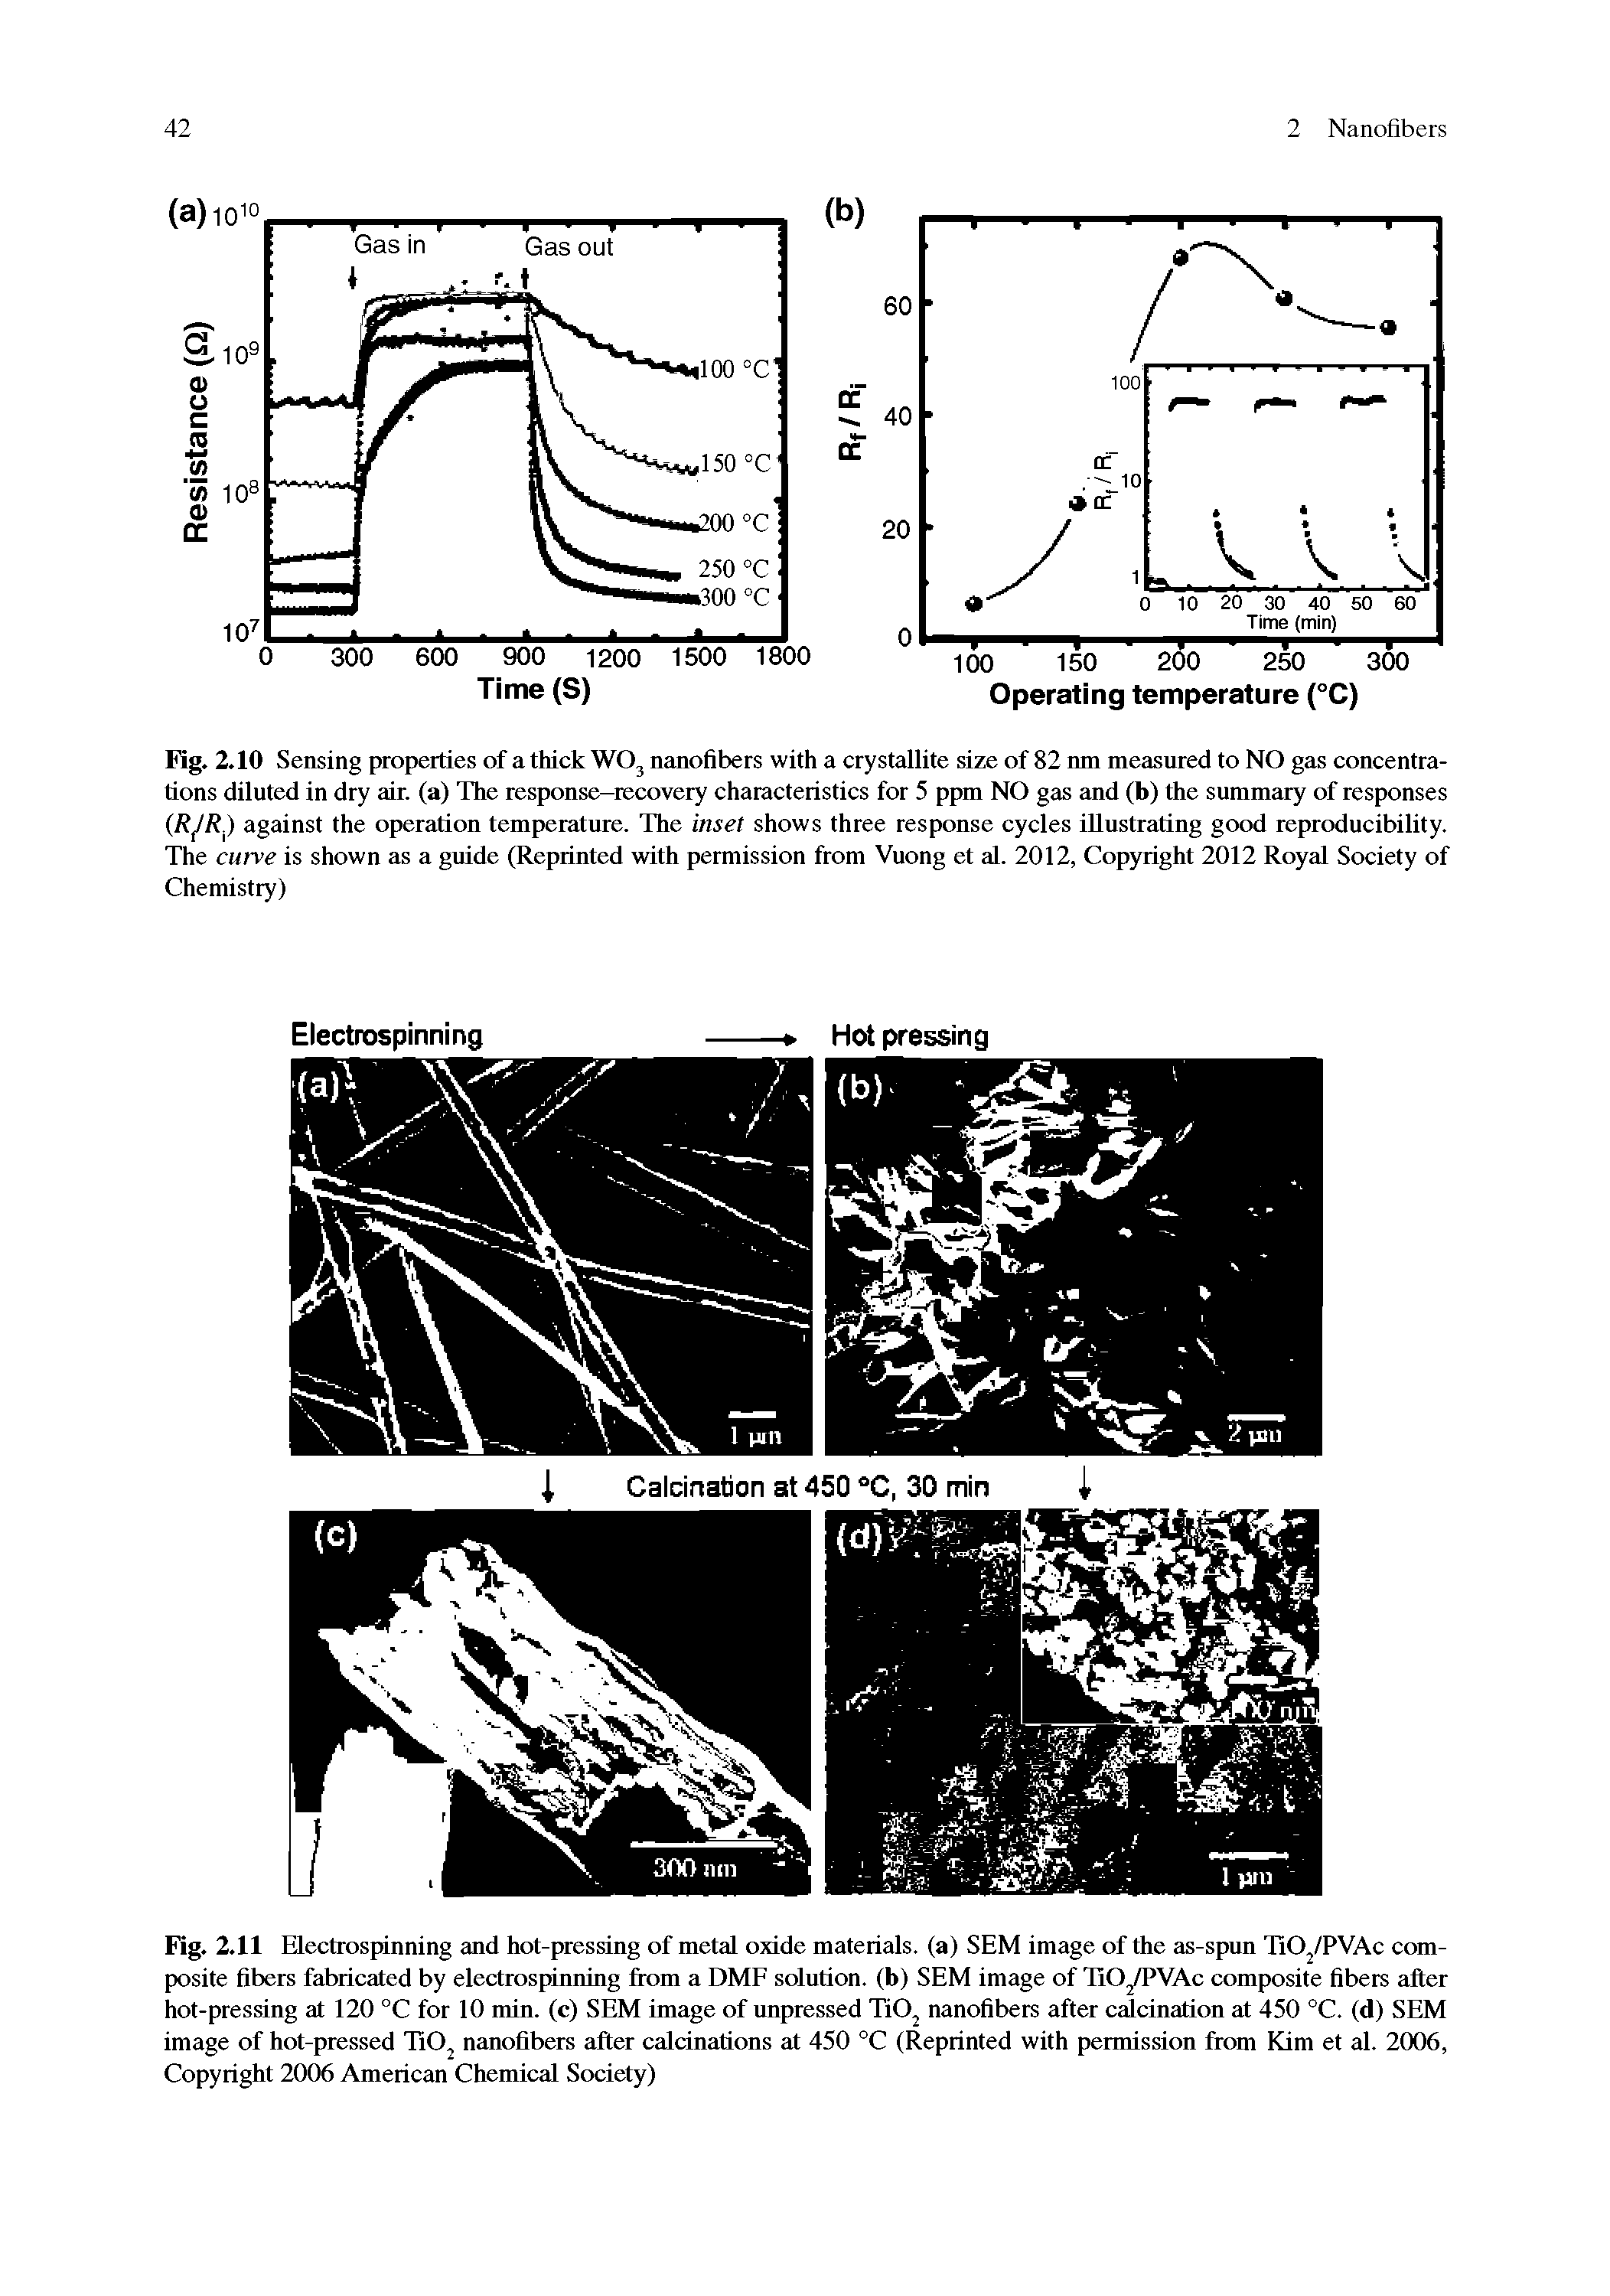 Fig. 2.11 Electrospinning and hot-pressing of metal oxide materials, (a) SEM image of the as-spun TiOj/PVAc composite fibers fabricated by electrospinning from a DMF solution, (b) SEM image of TiOj/PVAc composite fibers after hot-pressing at 120 °C for 10 min. (c) SEM image of unpressed TiO nanofibers after caicination at 450 °C. (d) SEM image of hot-pressed TiOj nanofibers after calcinations at 450 °C (Reprinted with permission from Kim et al. 2006, Copyright 2006 American Chemical Society)...